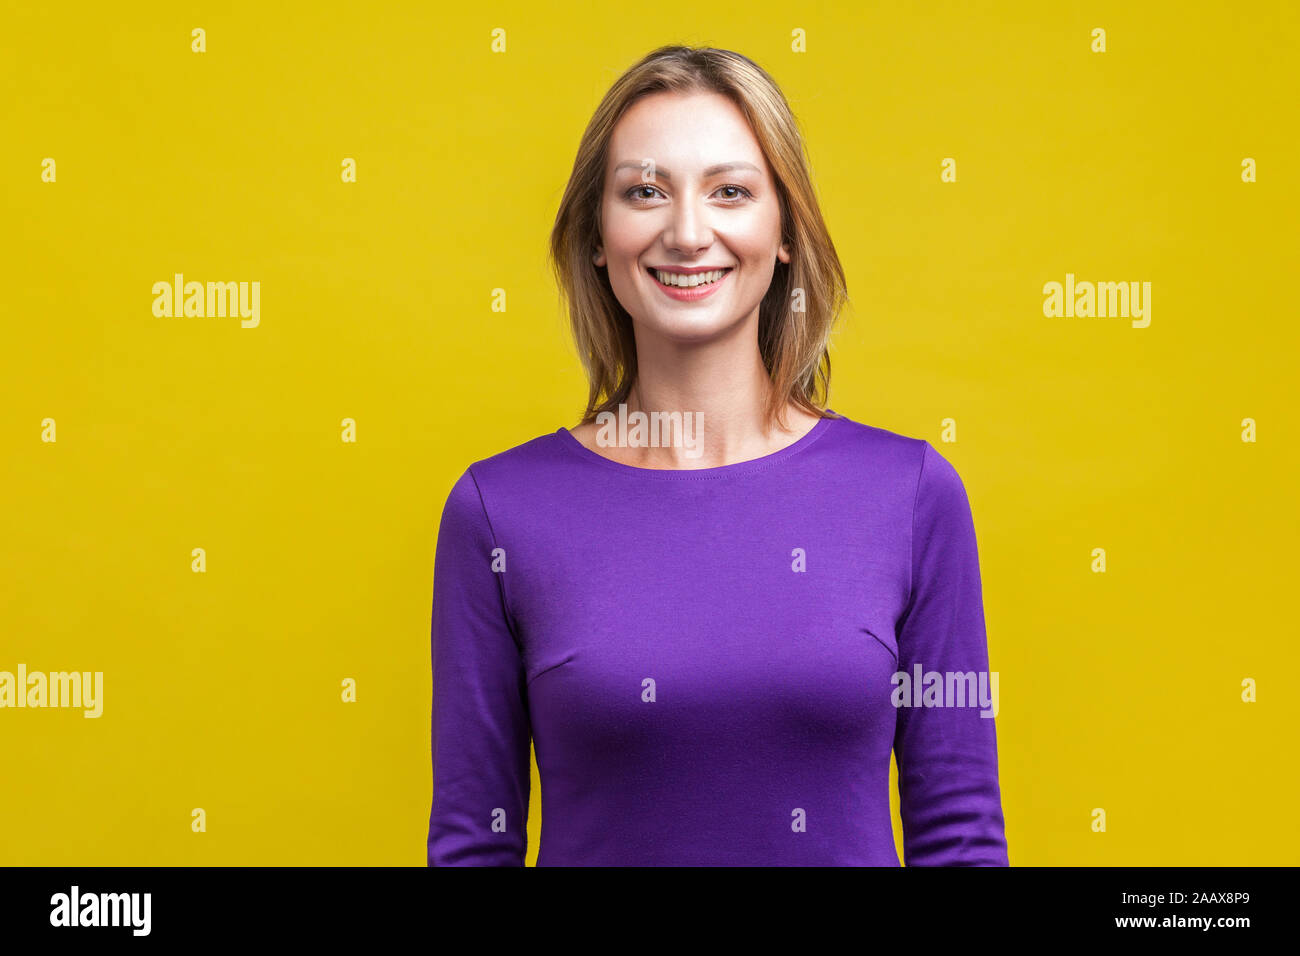 Portrait of positive elegant woman in tight purple dress standing, looking at camera with cute engaging toothy smile, beautiful with clean shiny skin. Stock Photo